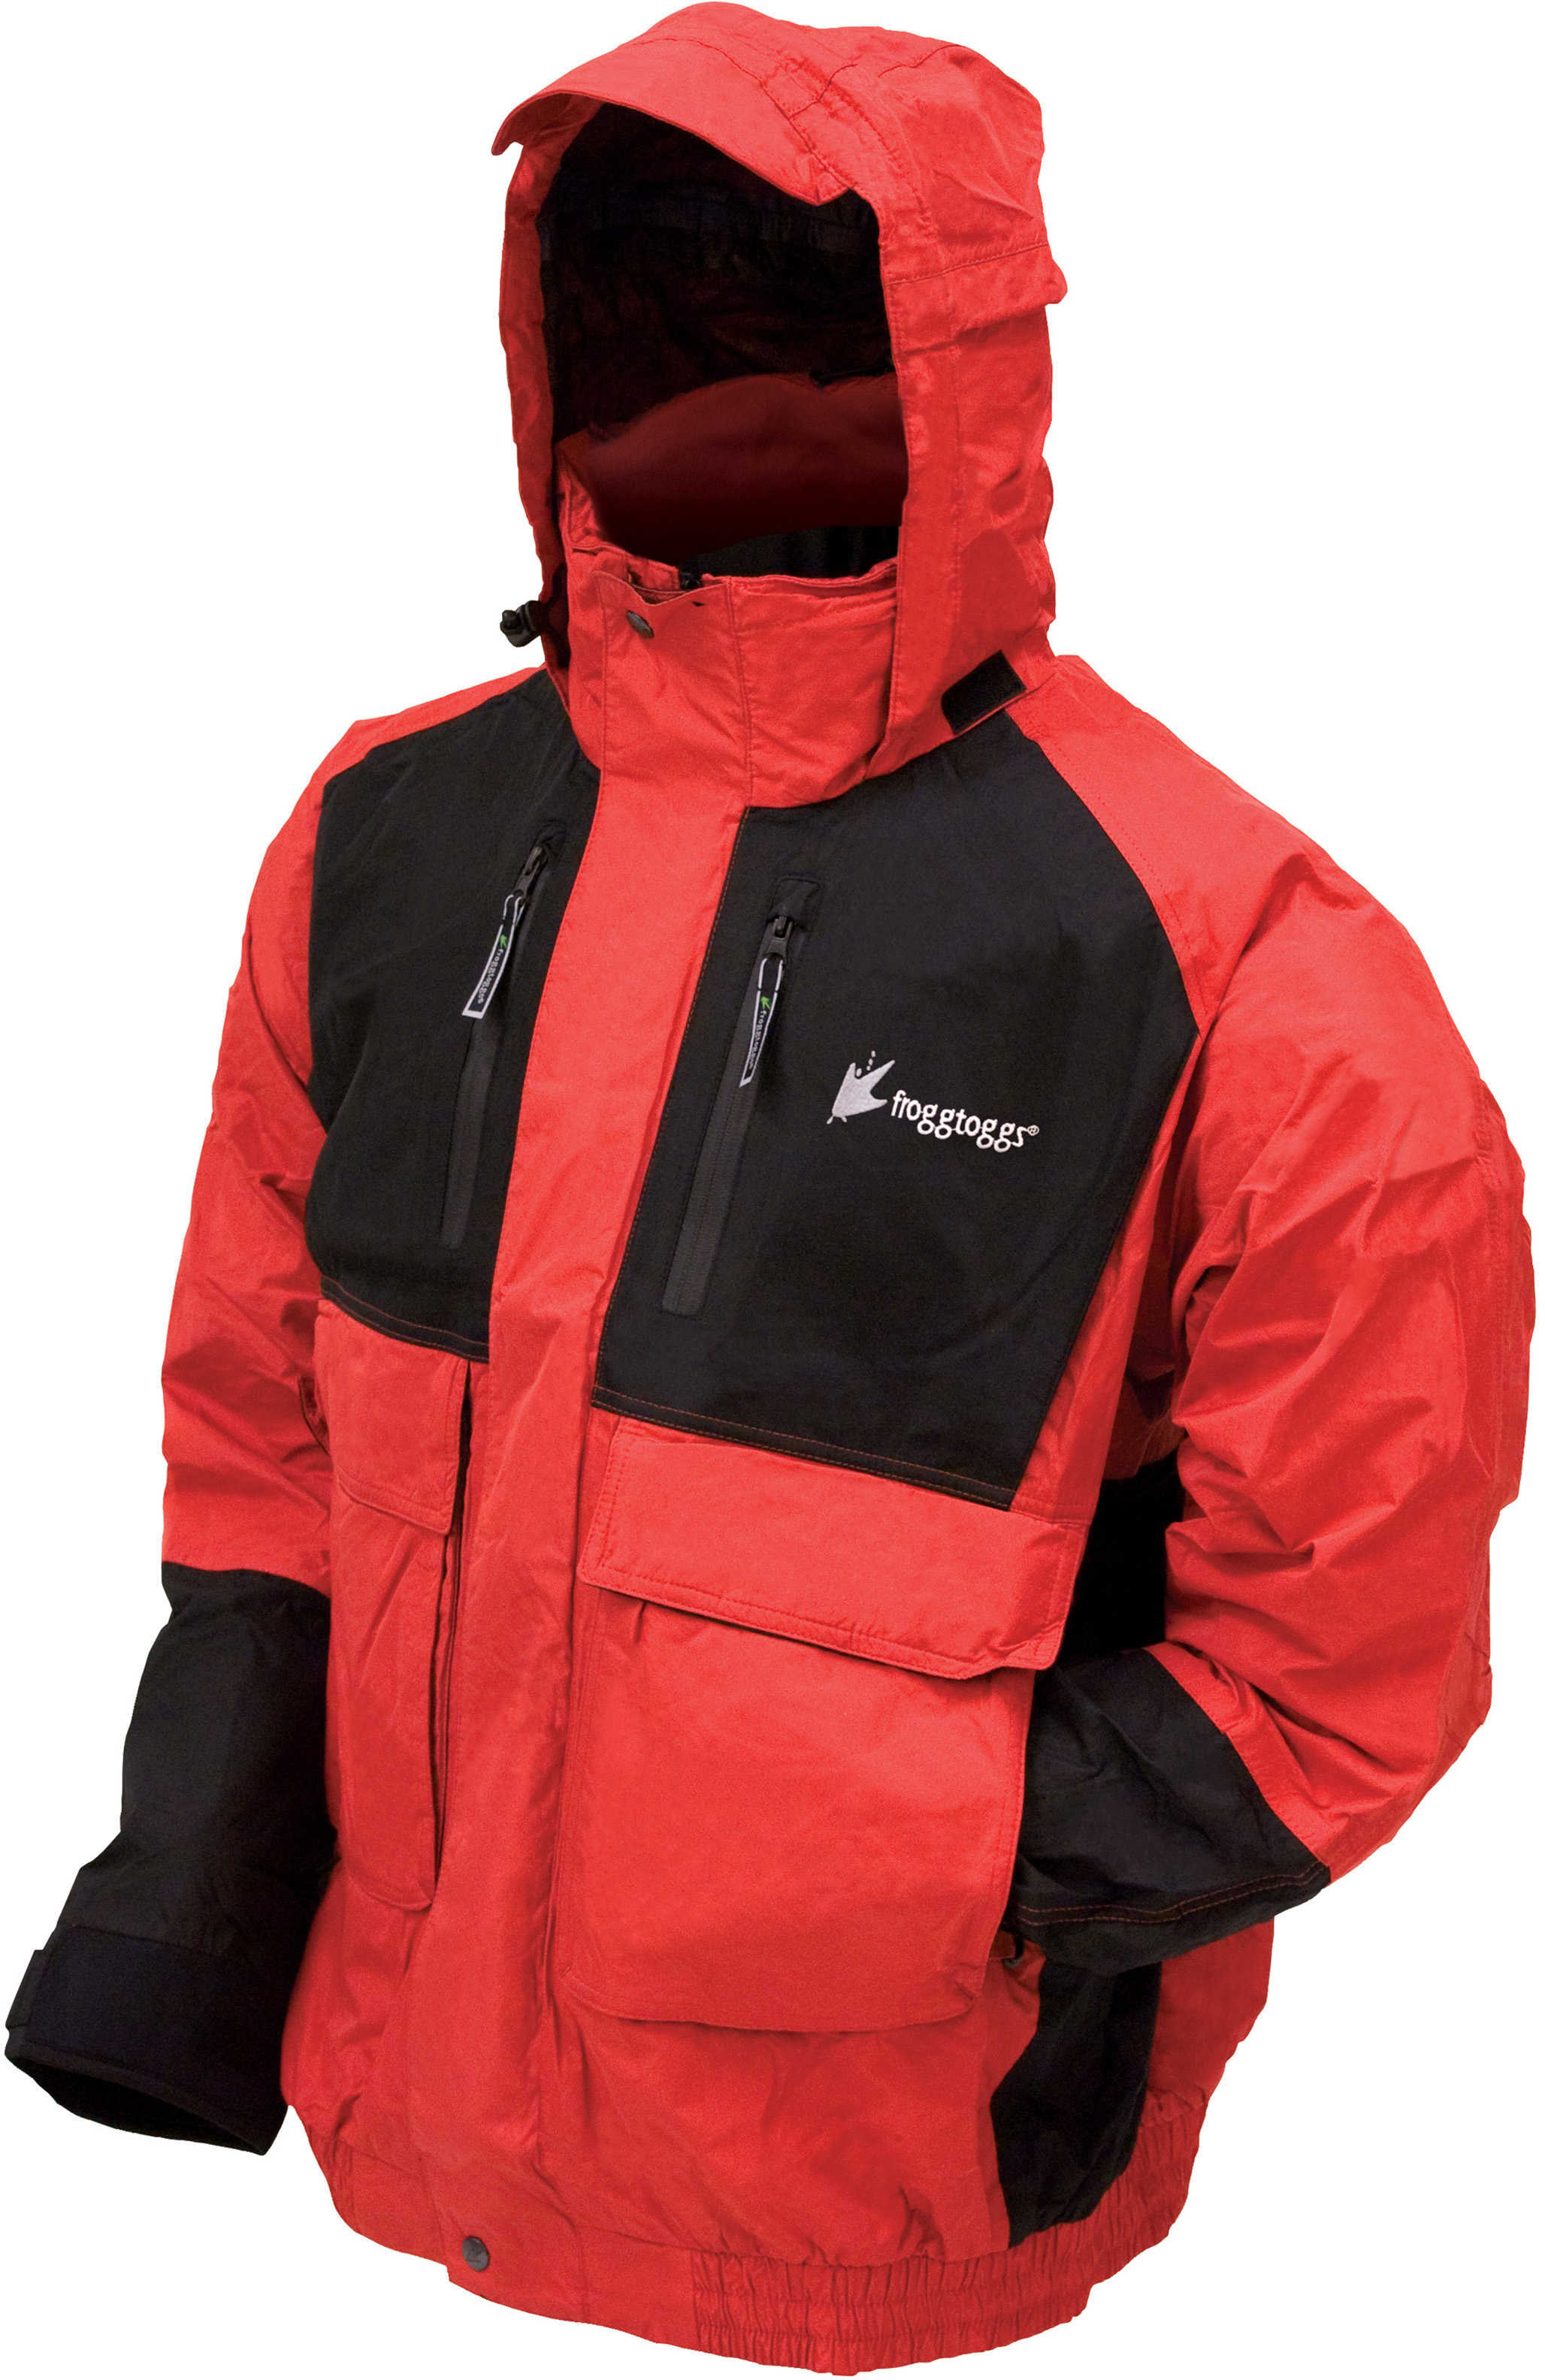 Frogg Toggs Firebelly Toadz Jacket Black/Red Small NT6201-110SM